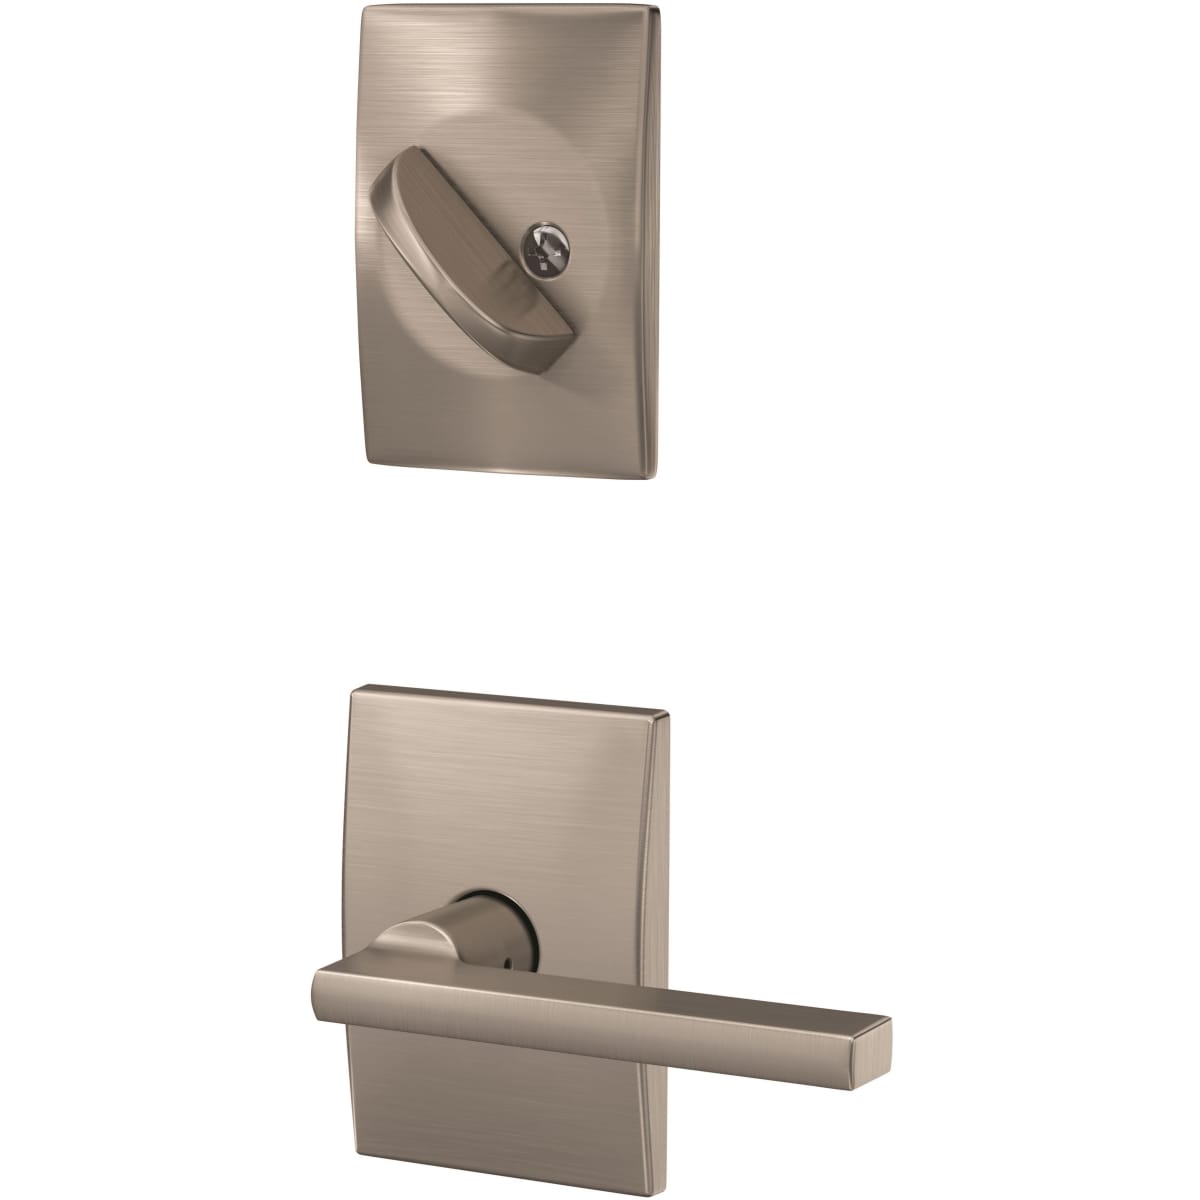 Small Format Interchangeable Core (Schlage Profile) - ICK Lock Products